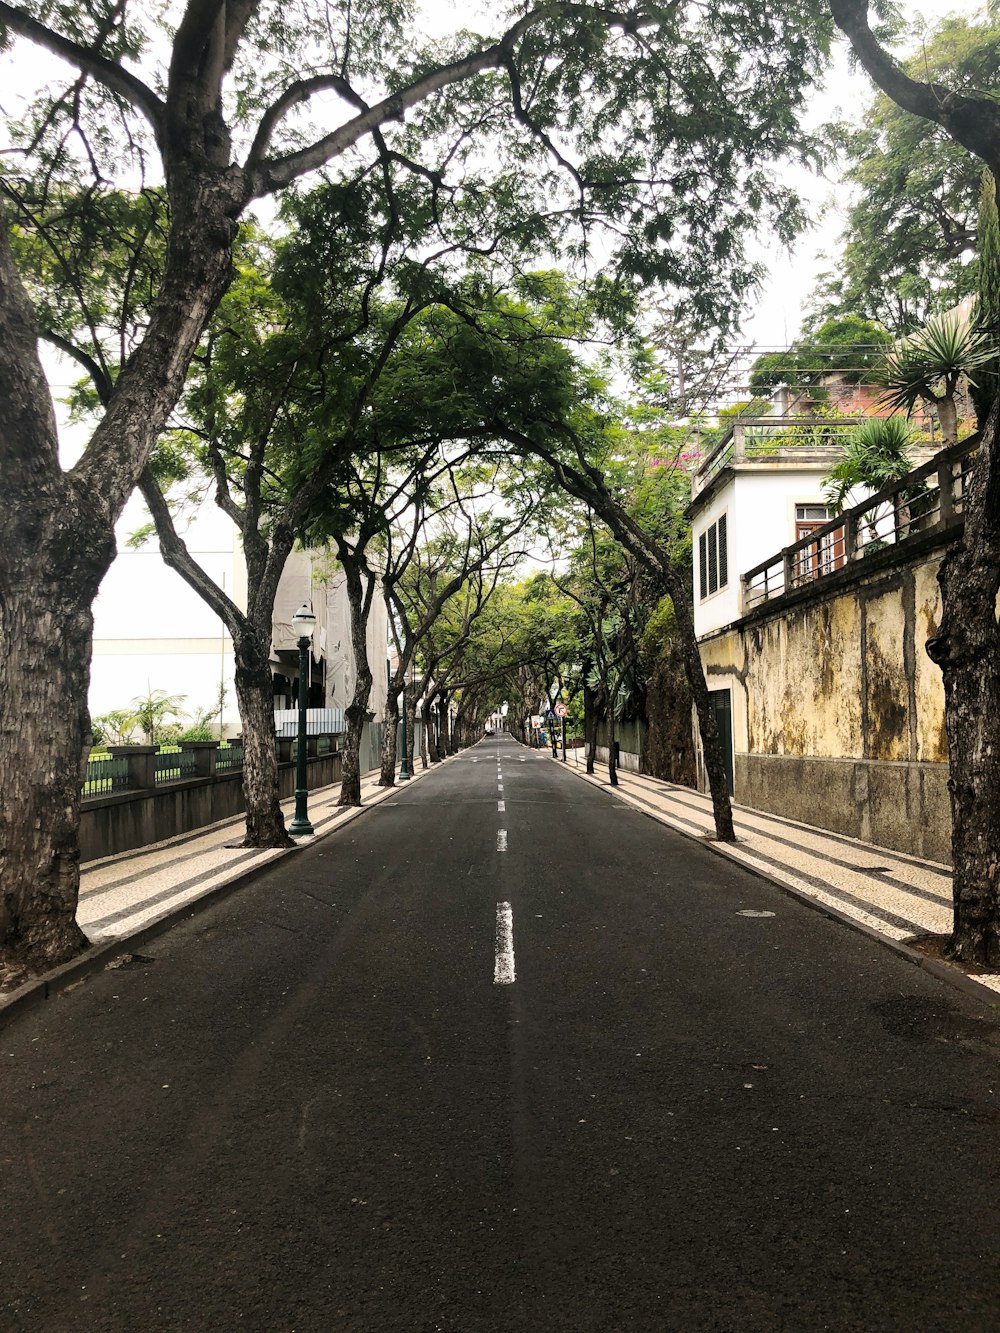 an empty street lined with trees and buildings